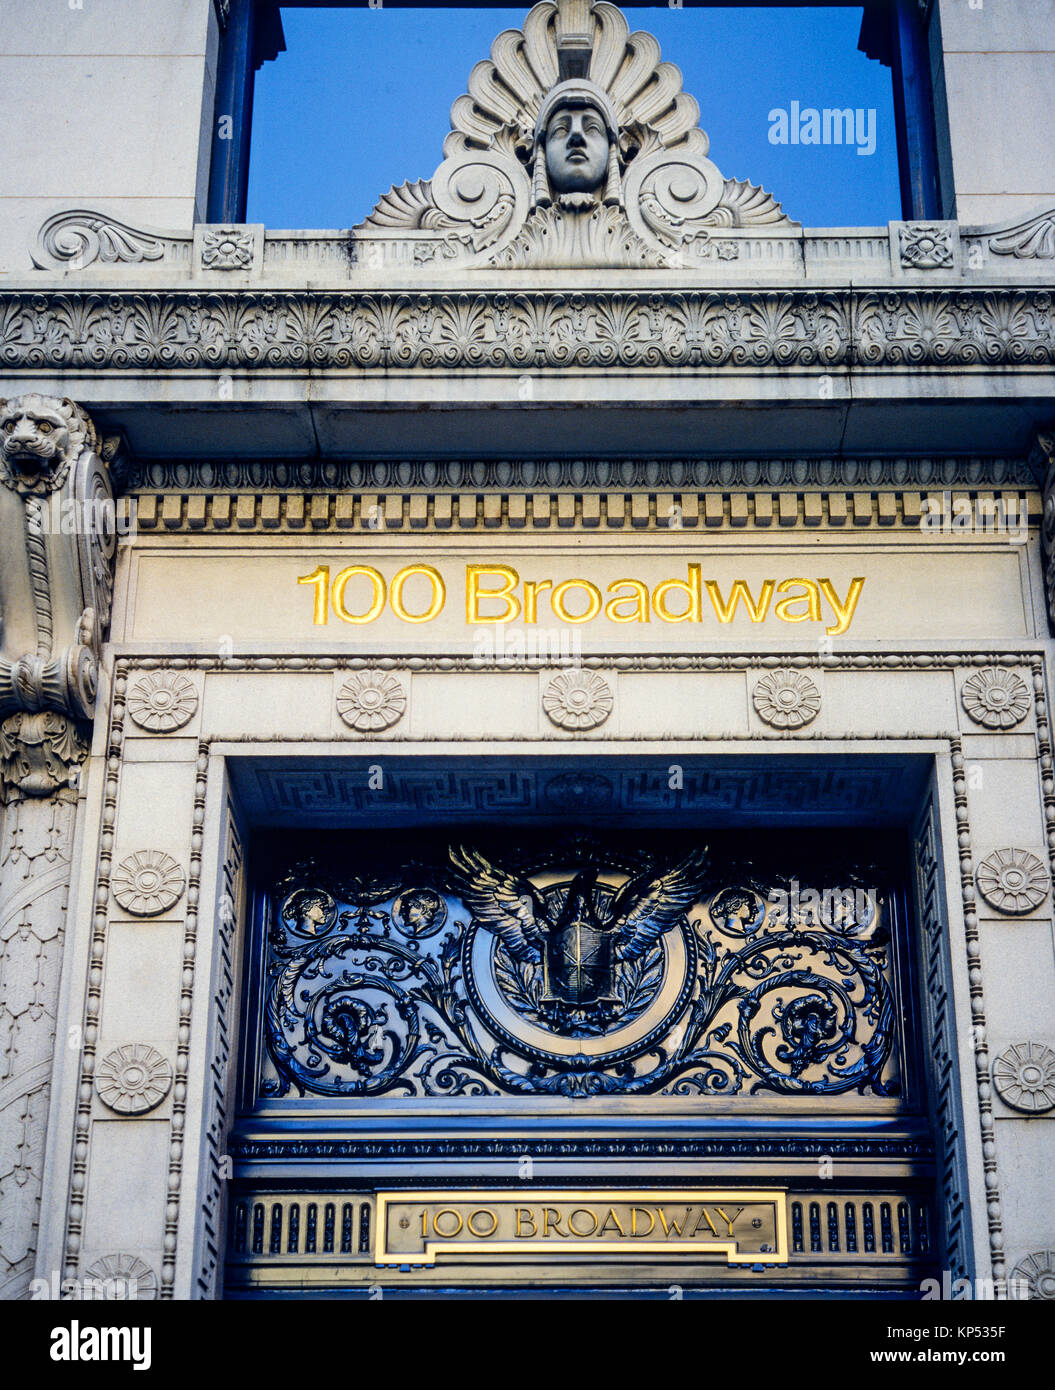 May 1982,New York,100 Broadway,American Surety building entrance,financial district,lower Manhattan,New york City,NY,NYC,USA, Stock Photo